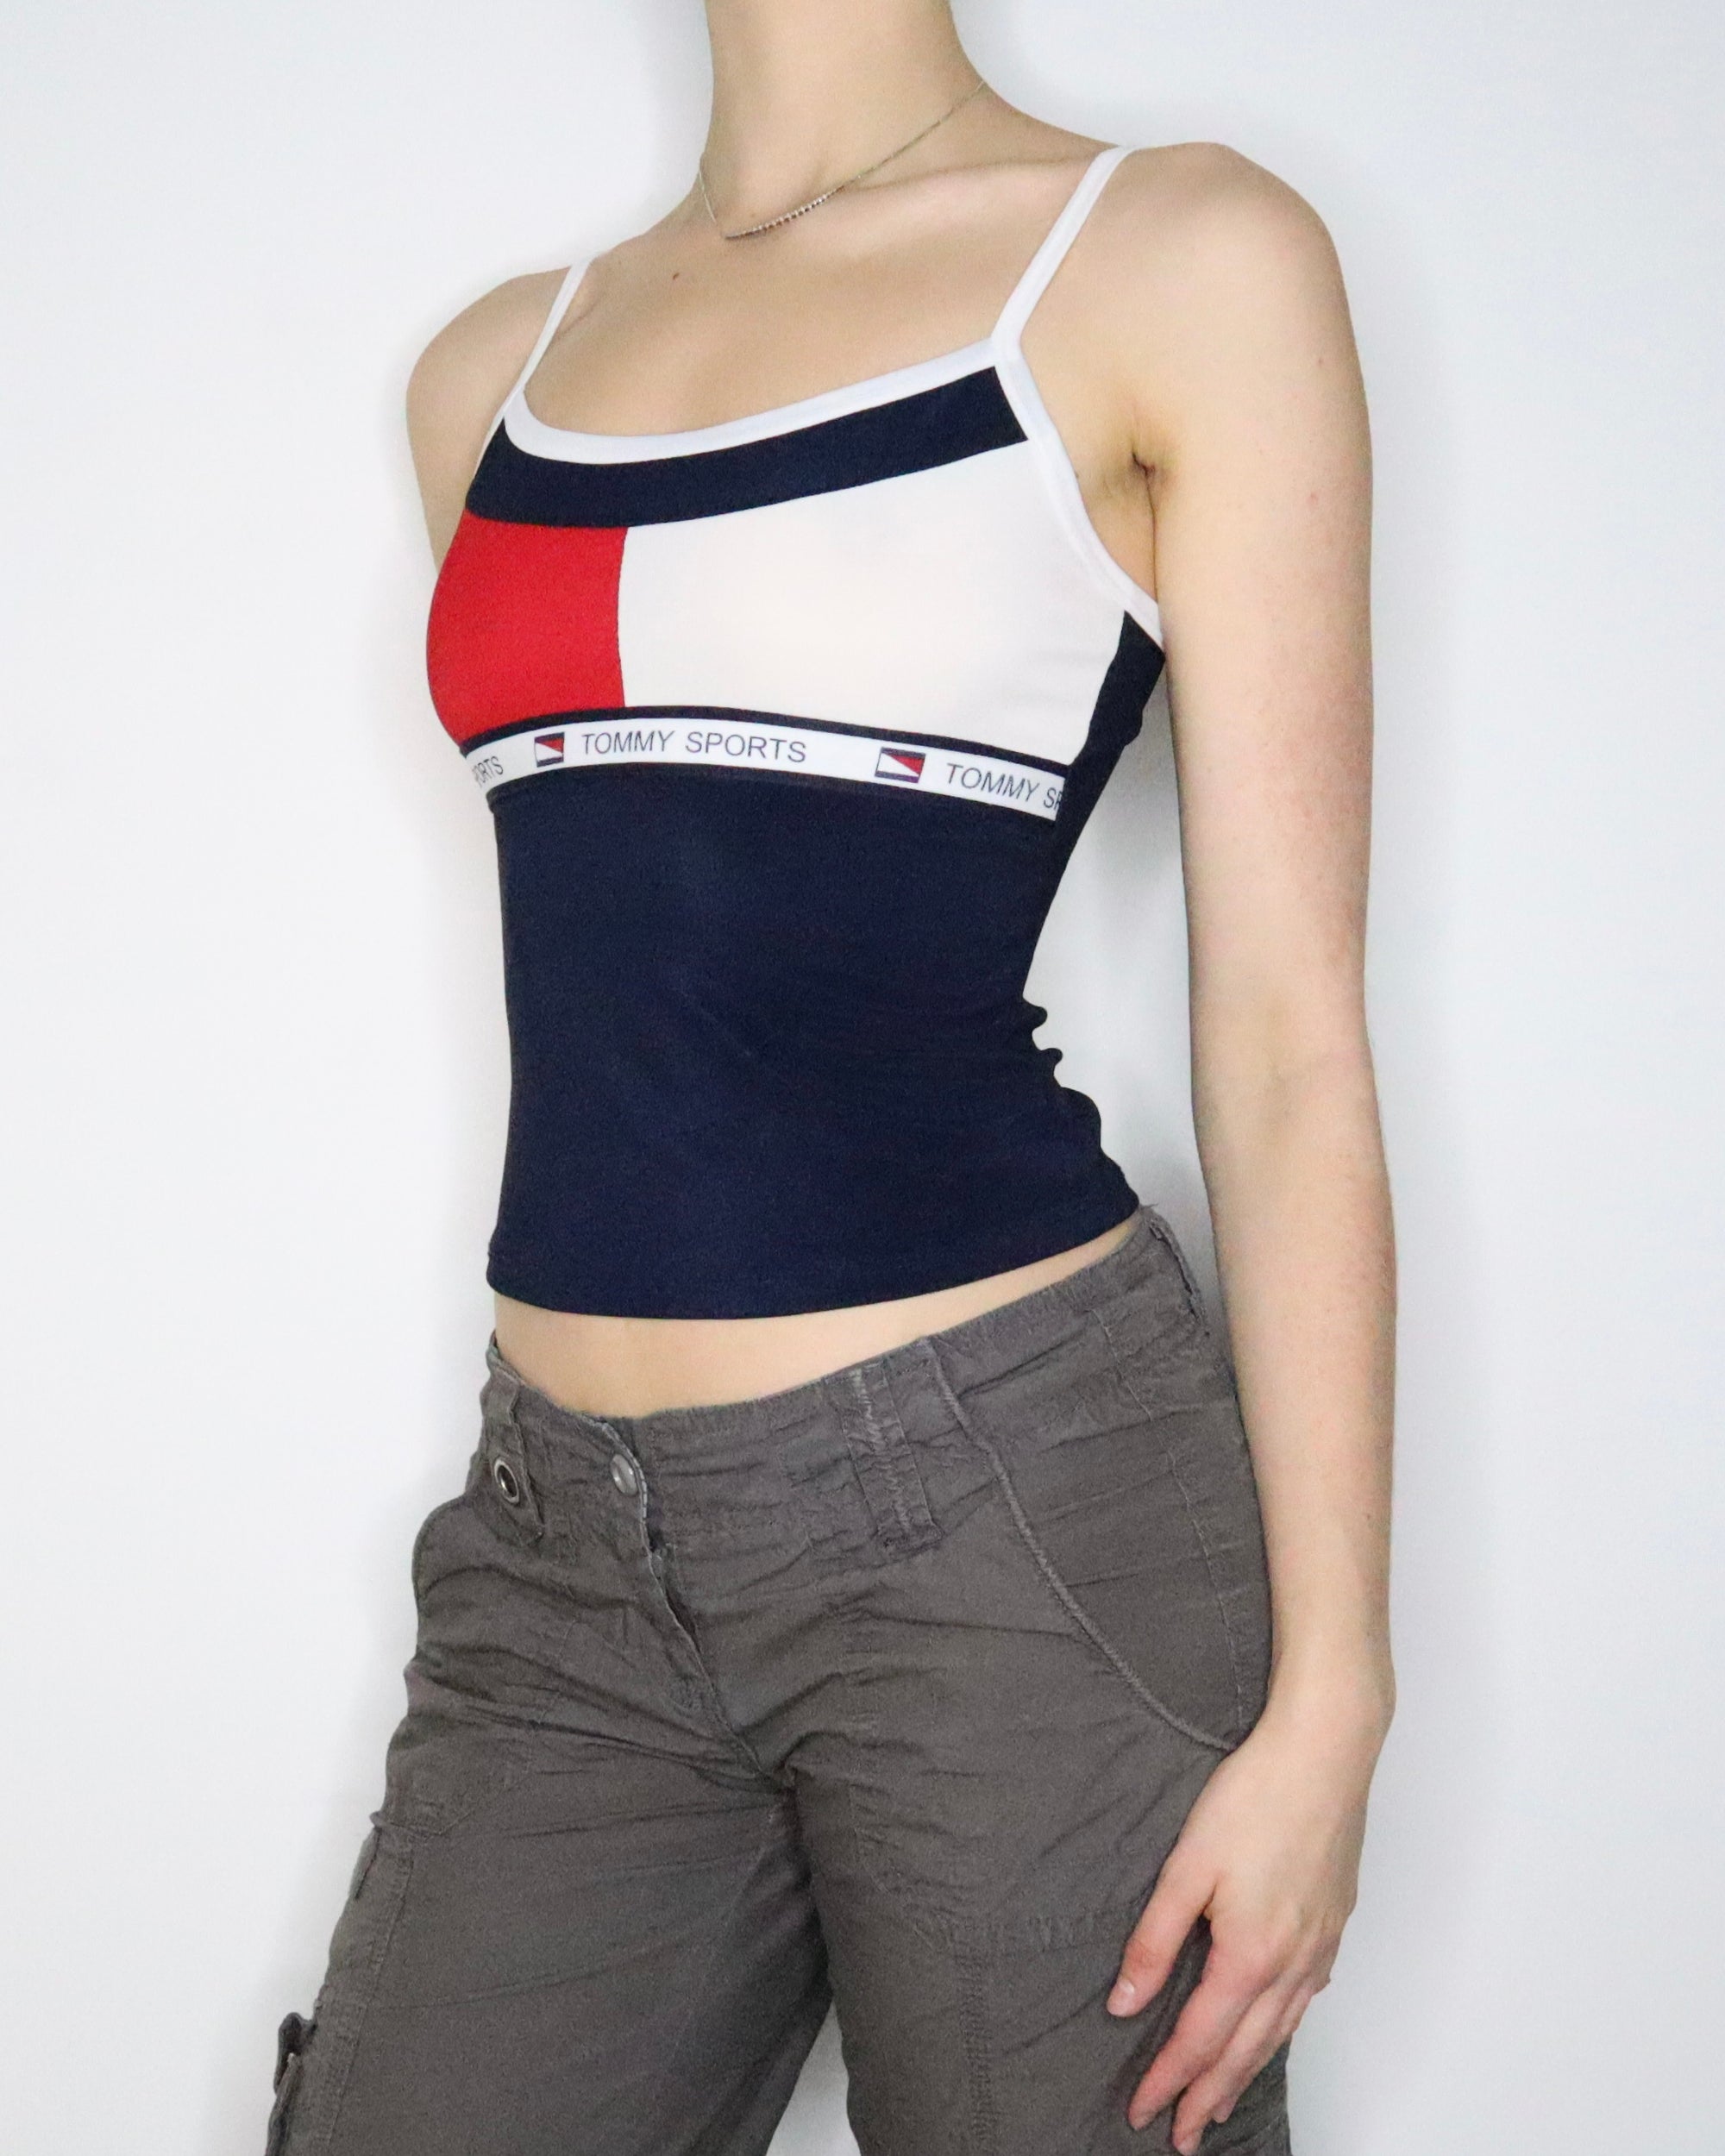 Tommy Hilfiger Camisole (Small) 